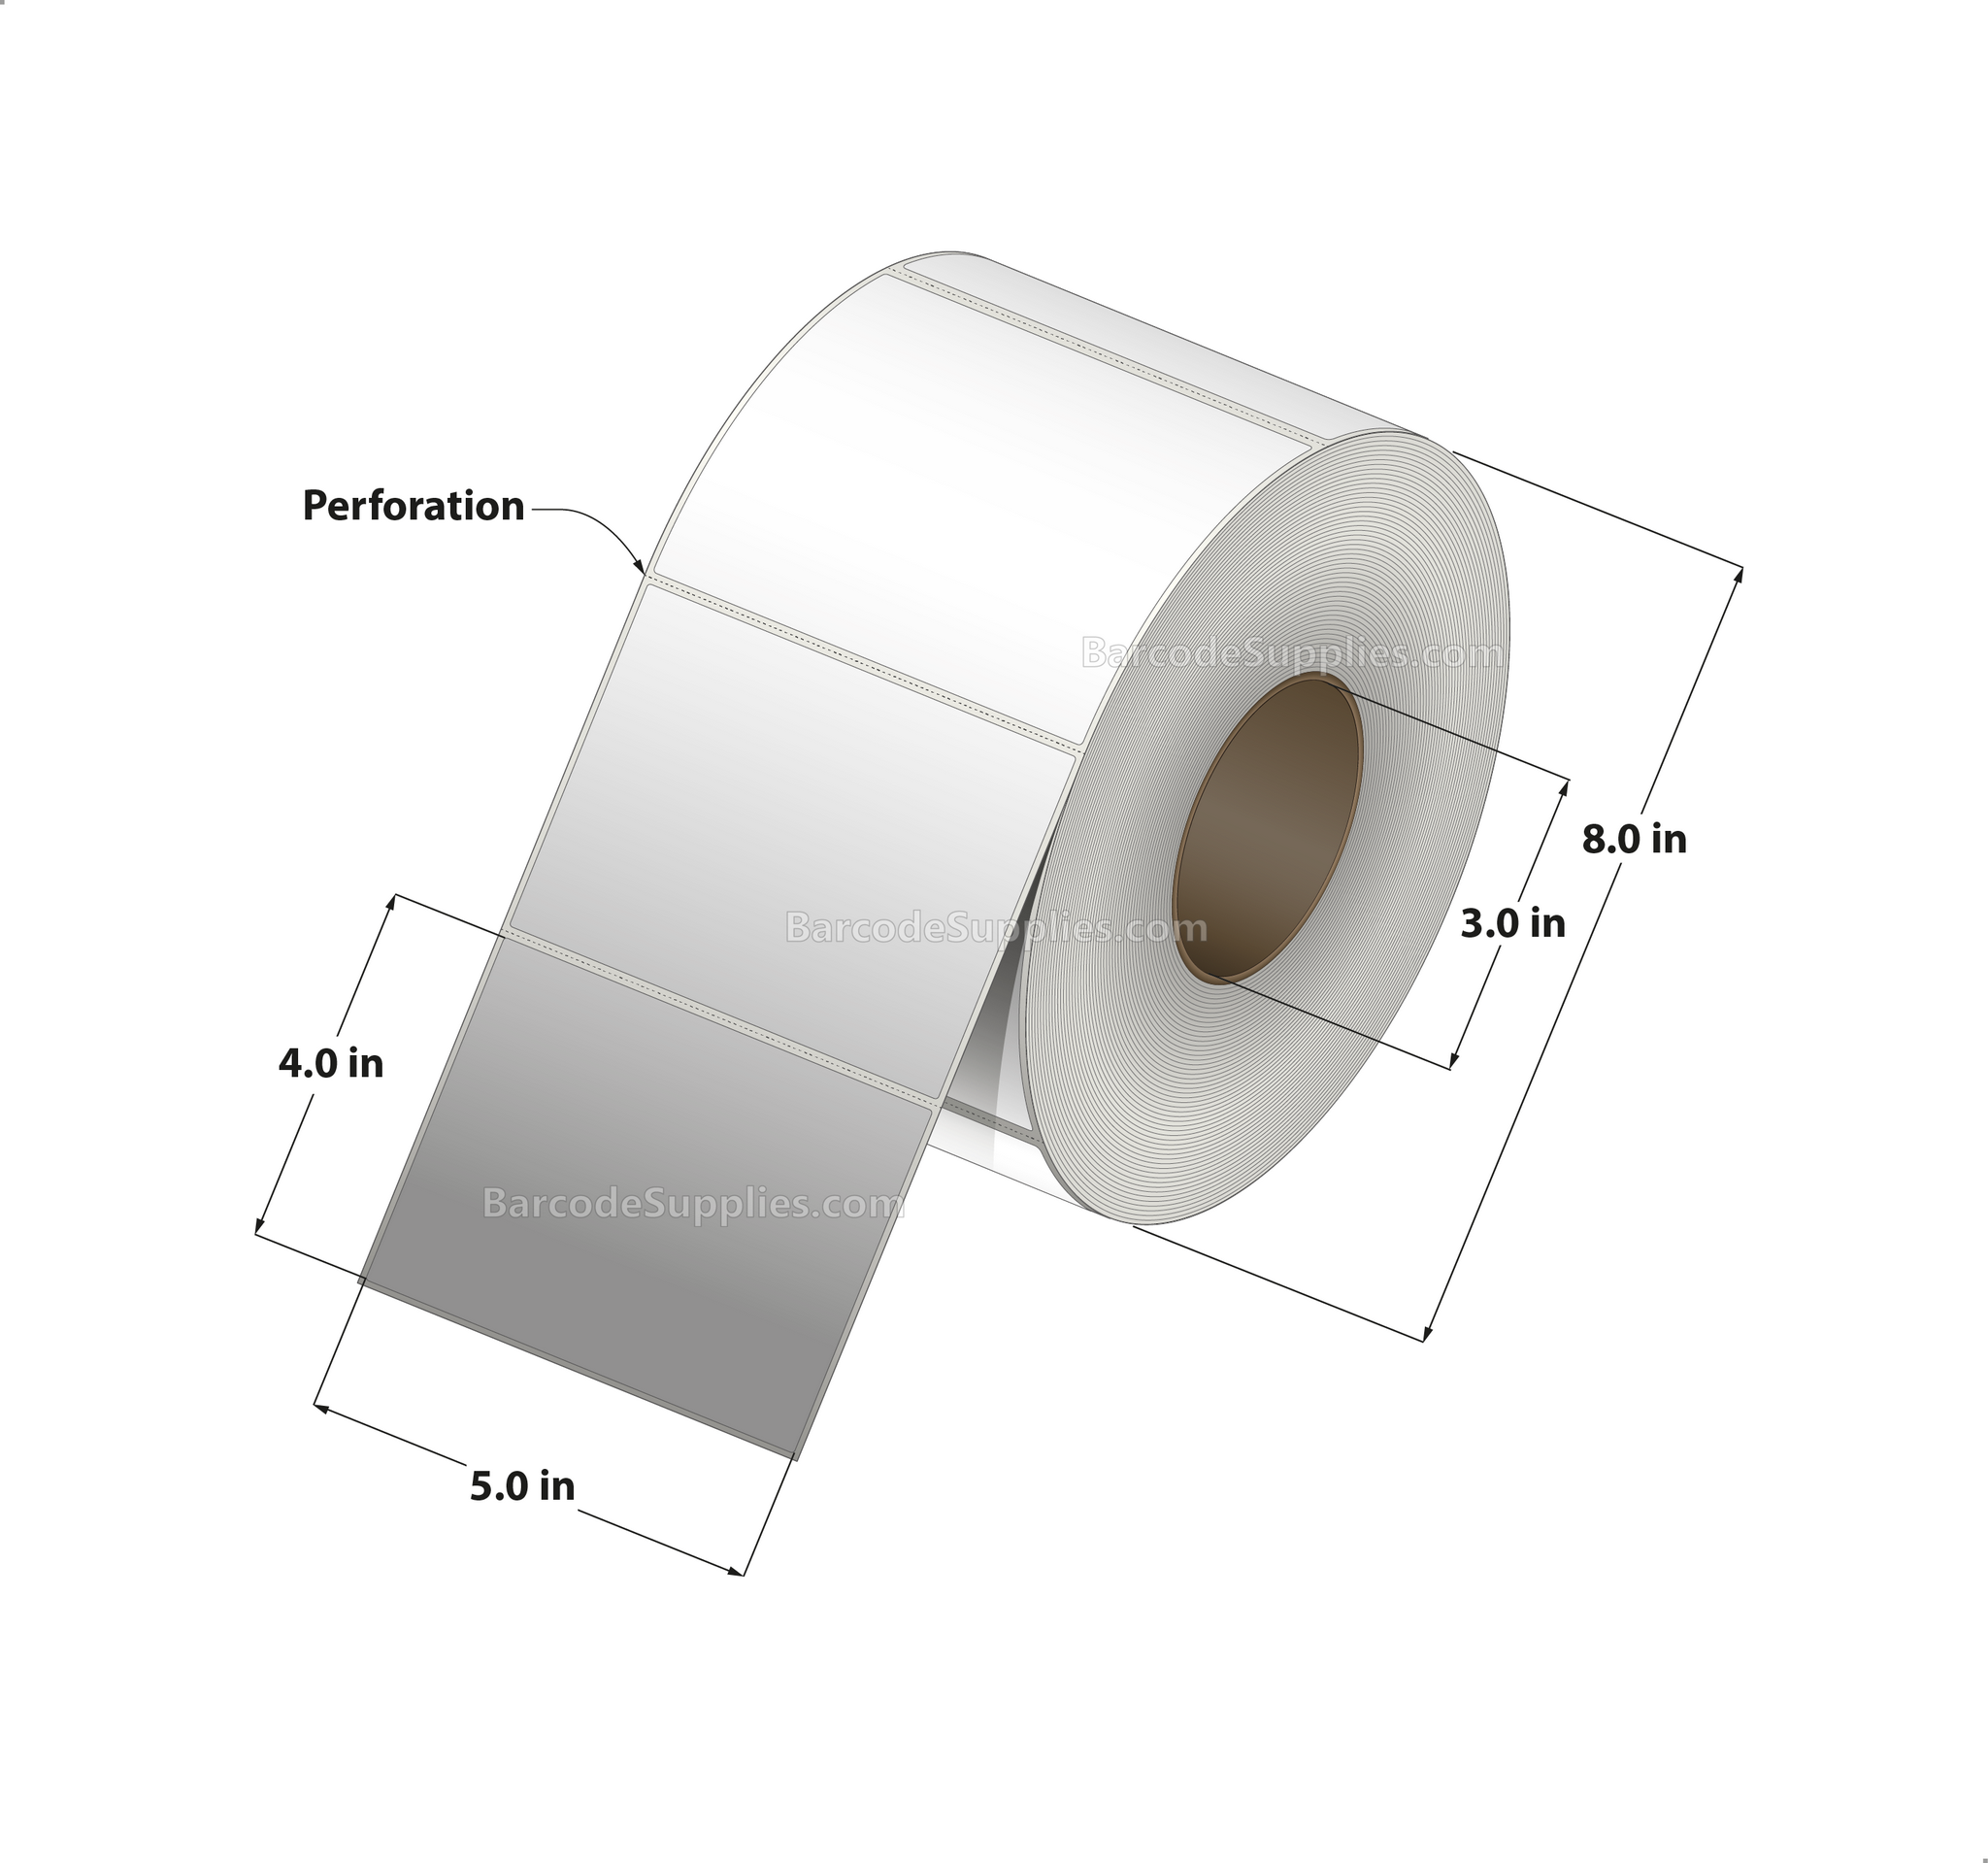 5 x 4 Thermal Transfer White Labels With Permanent Acrylic Adhesive - Perforated - 1500 Labels Per Roll - Carton Of 4 Rolls - 6000 Labels Total - MPN: TH54-1P